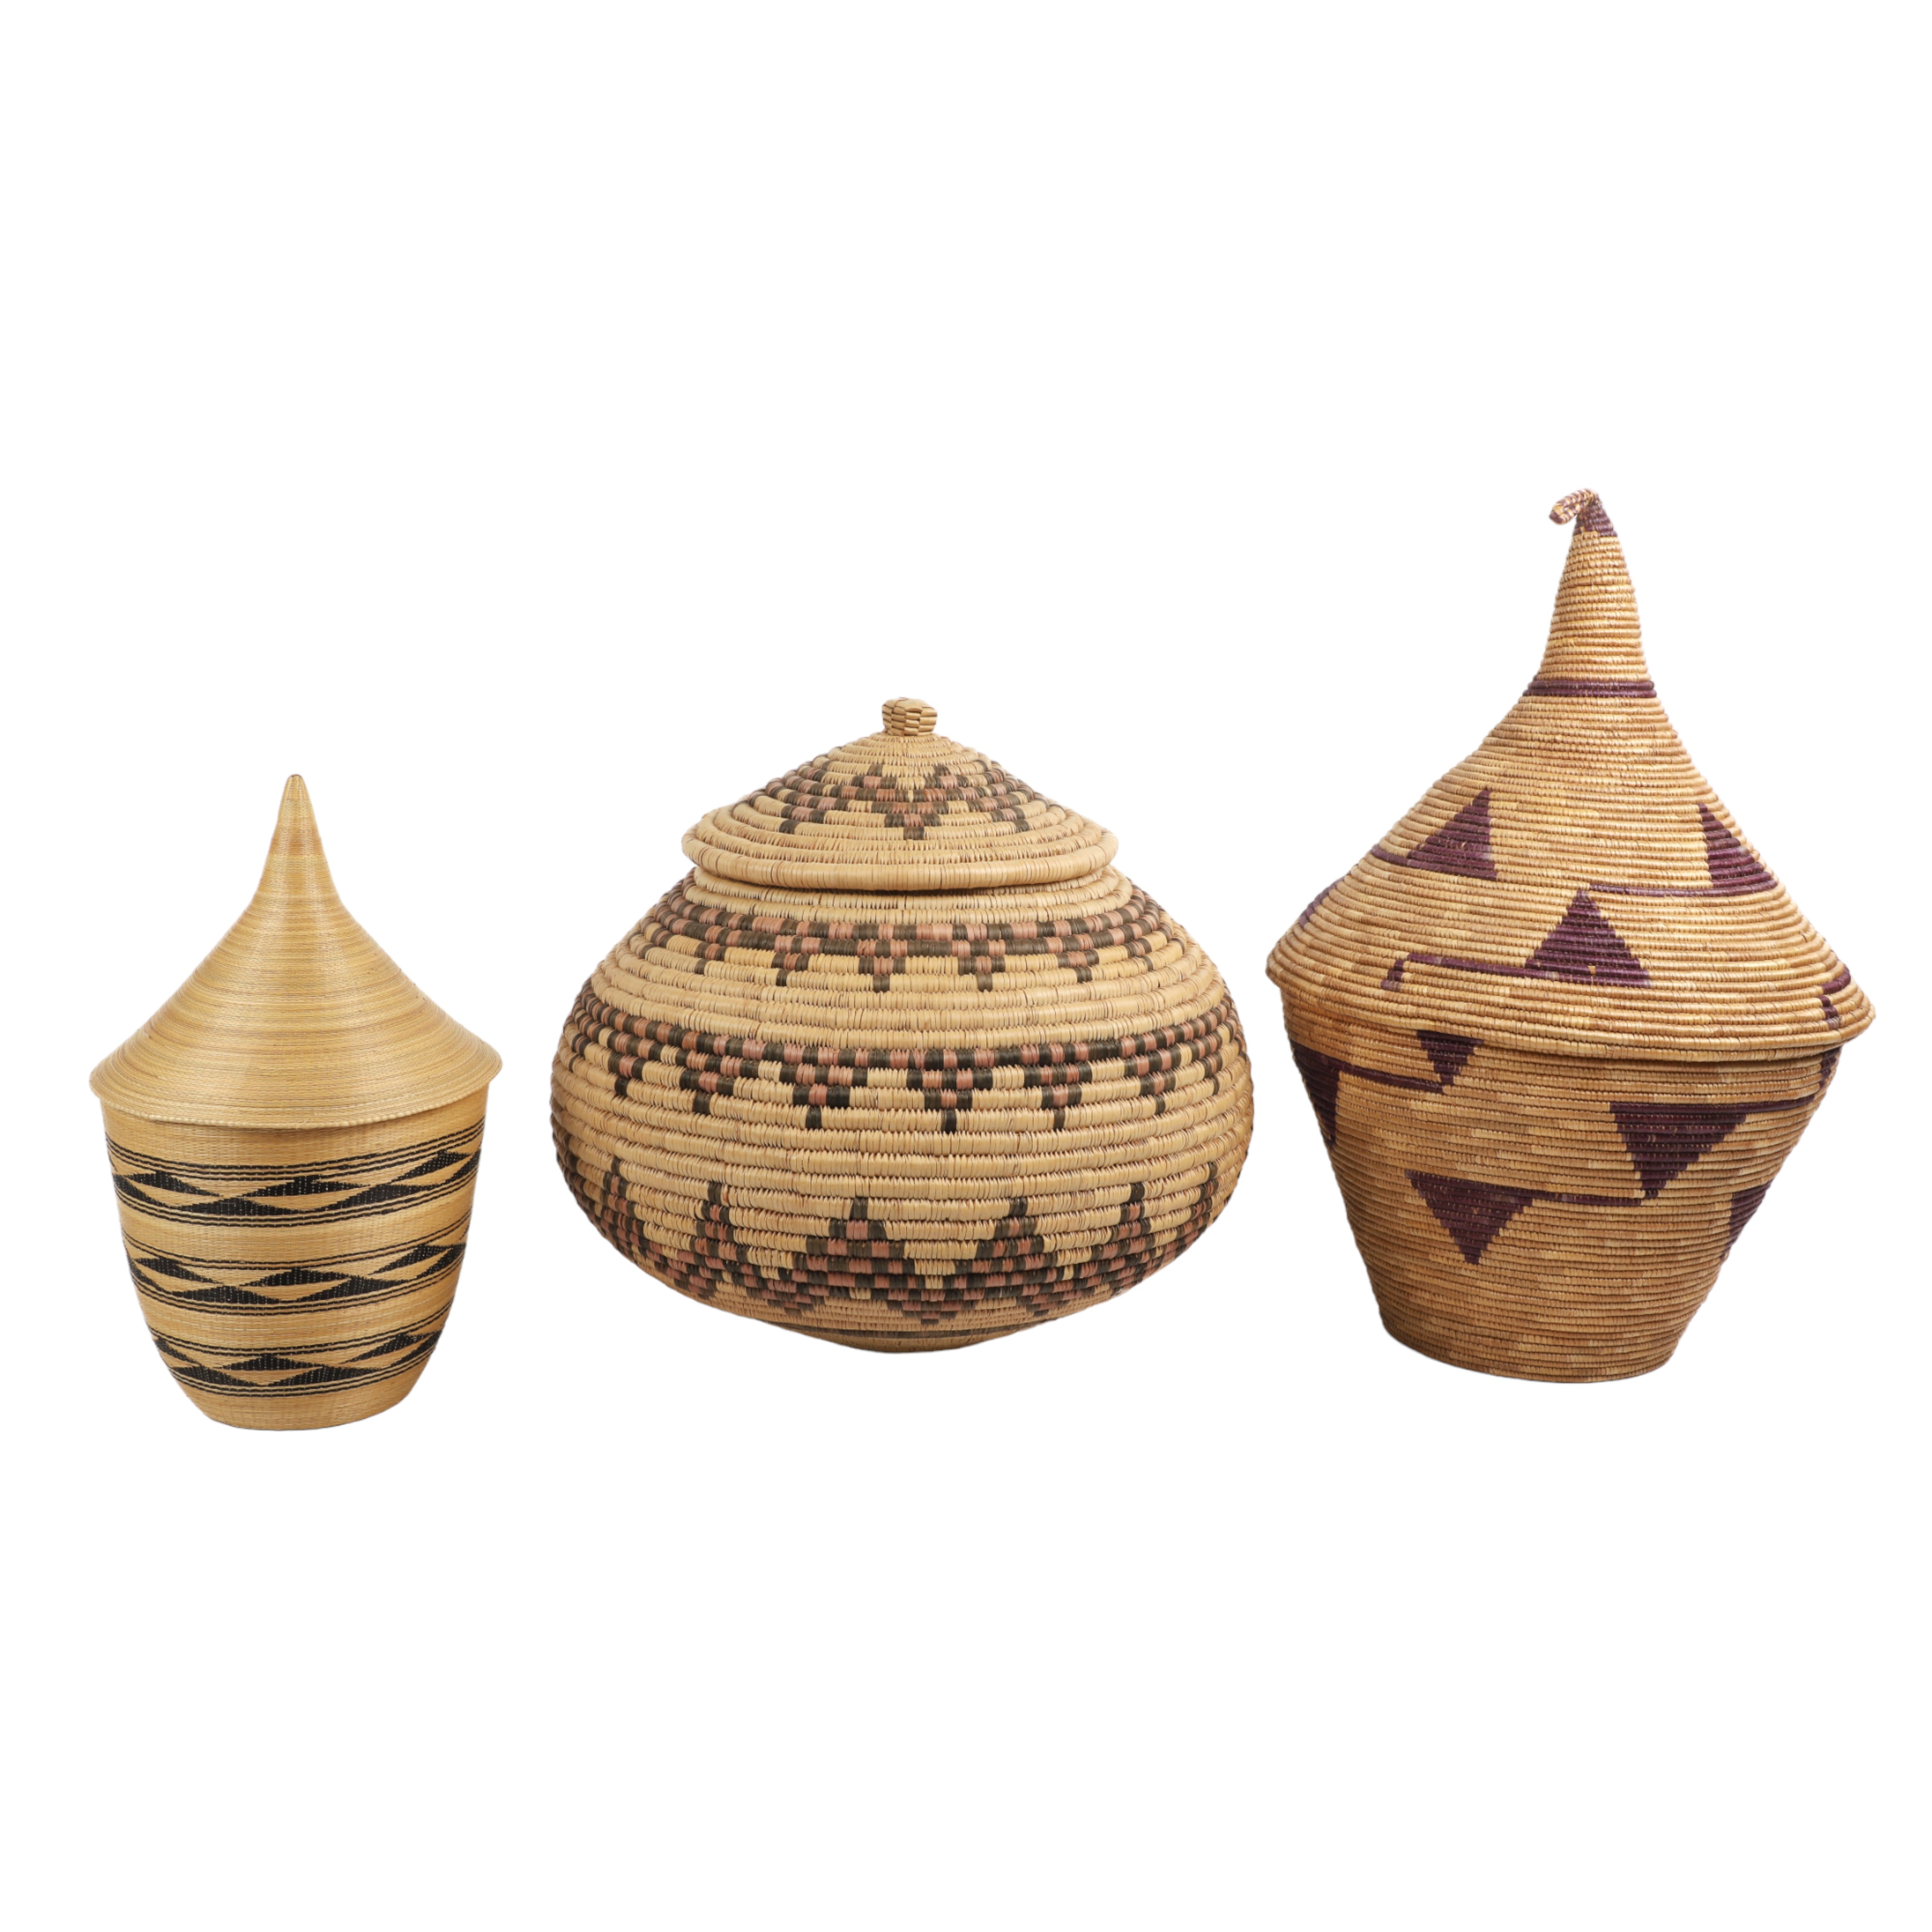 (3) Covered woven baskets, 19"H,